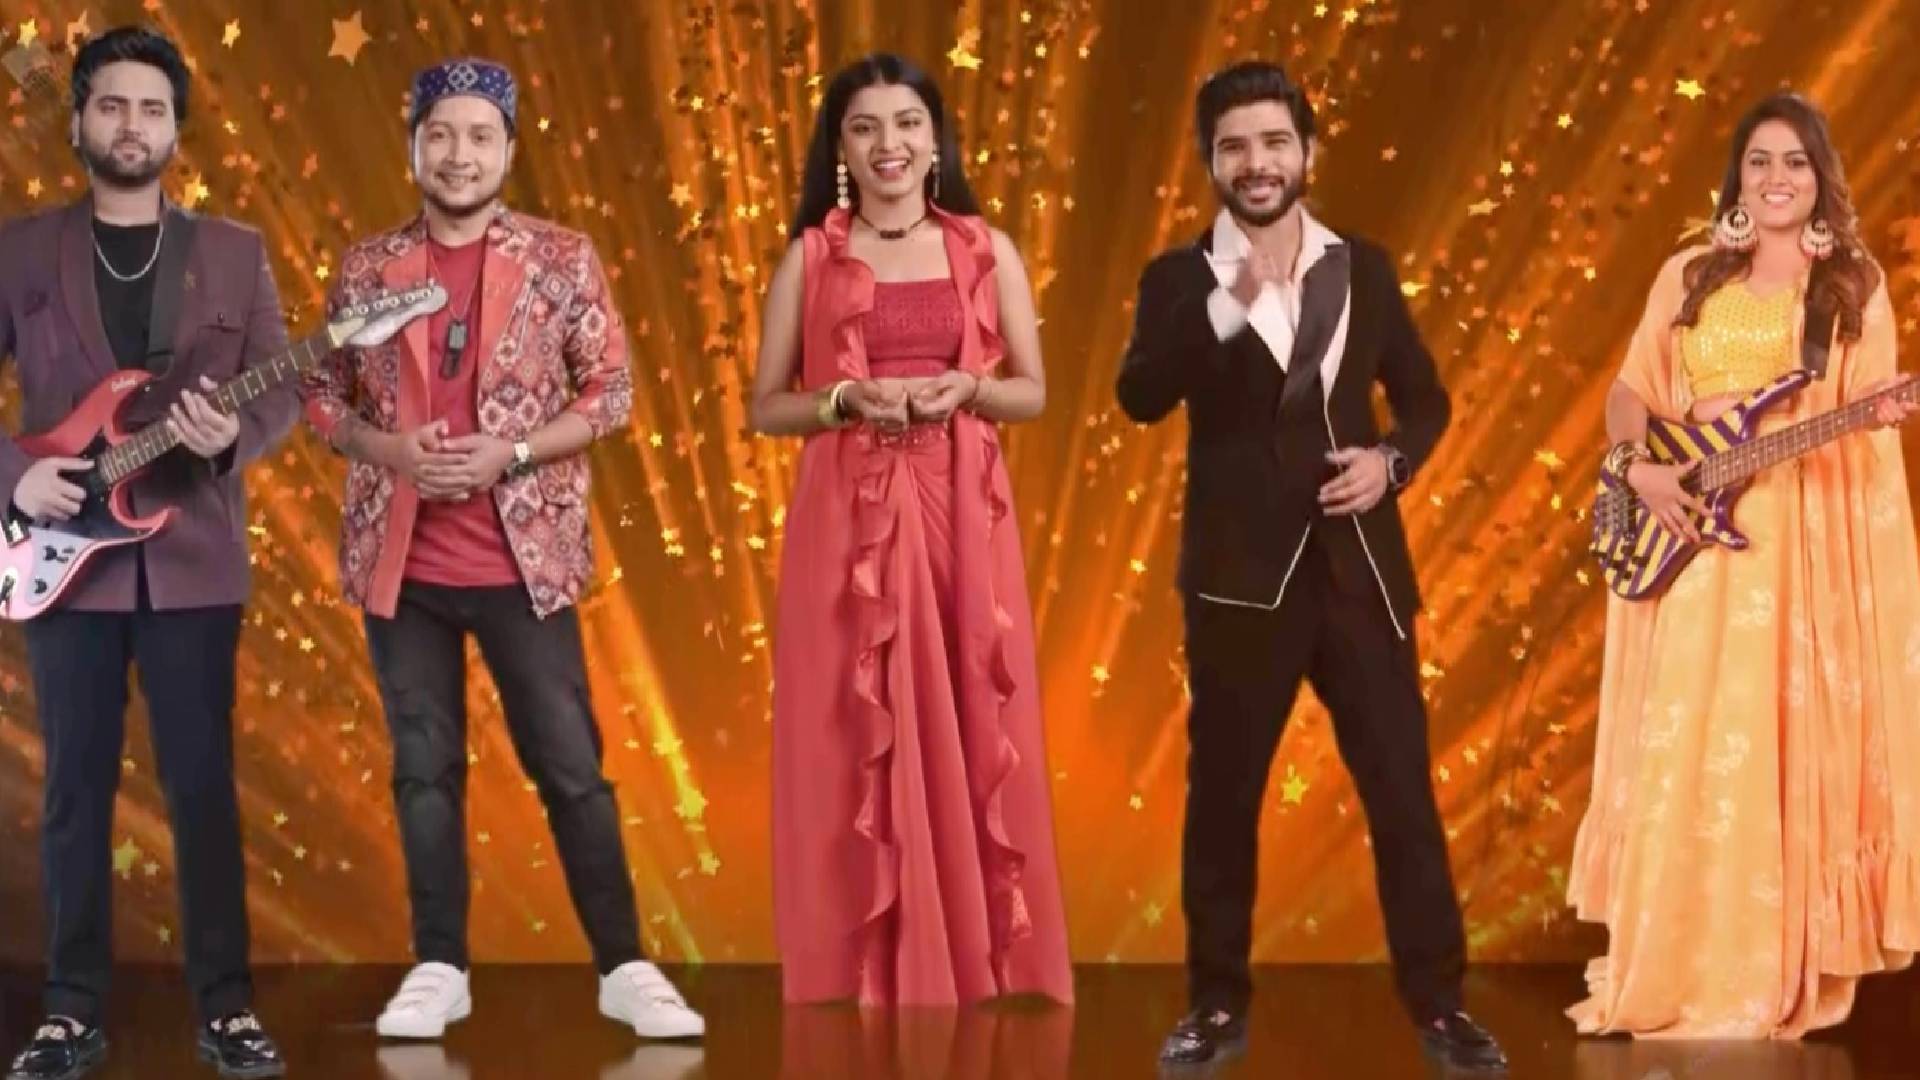 Sony Entertainment Television is on the hunt for the next ‘Superstar Singer’